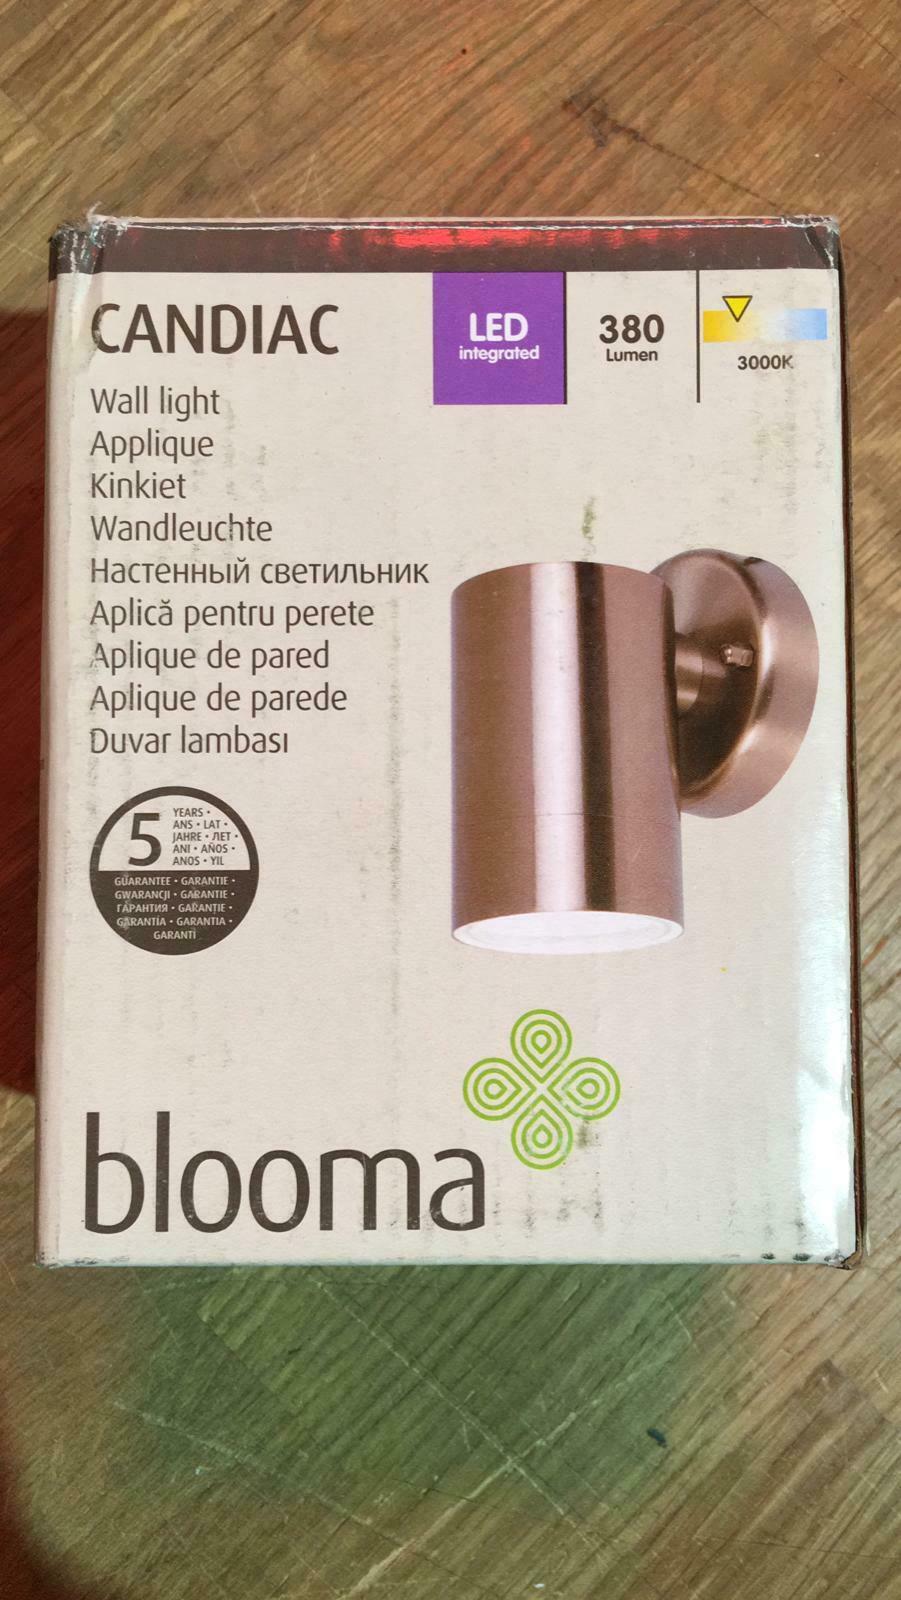 Blooma Candiac Copper effect Mains-powered LED Outdoor Wall light 380lm 4391